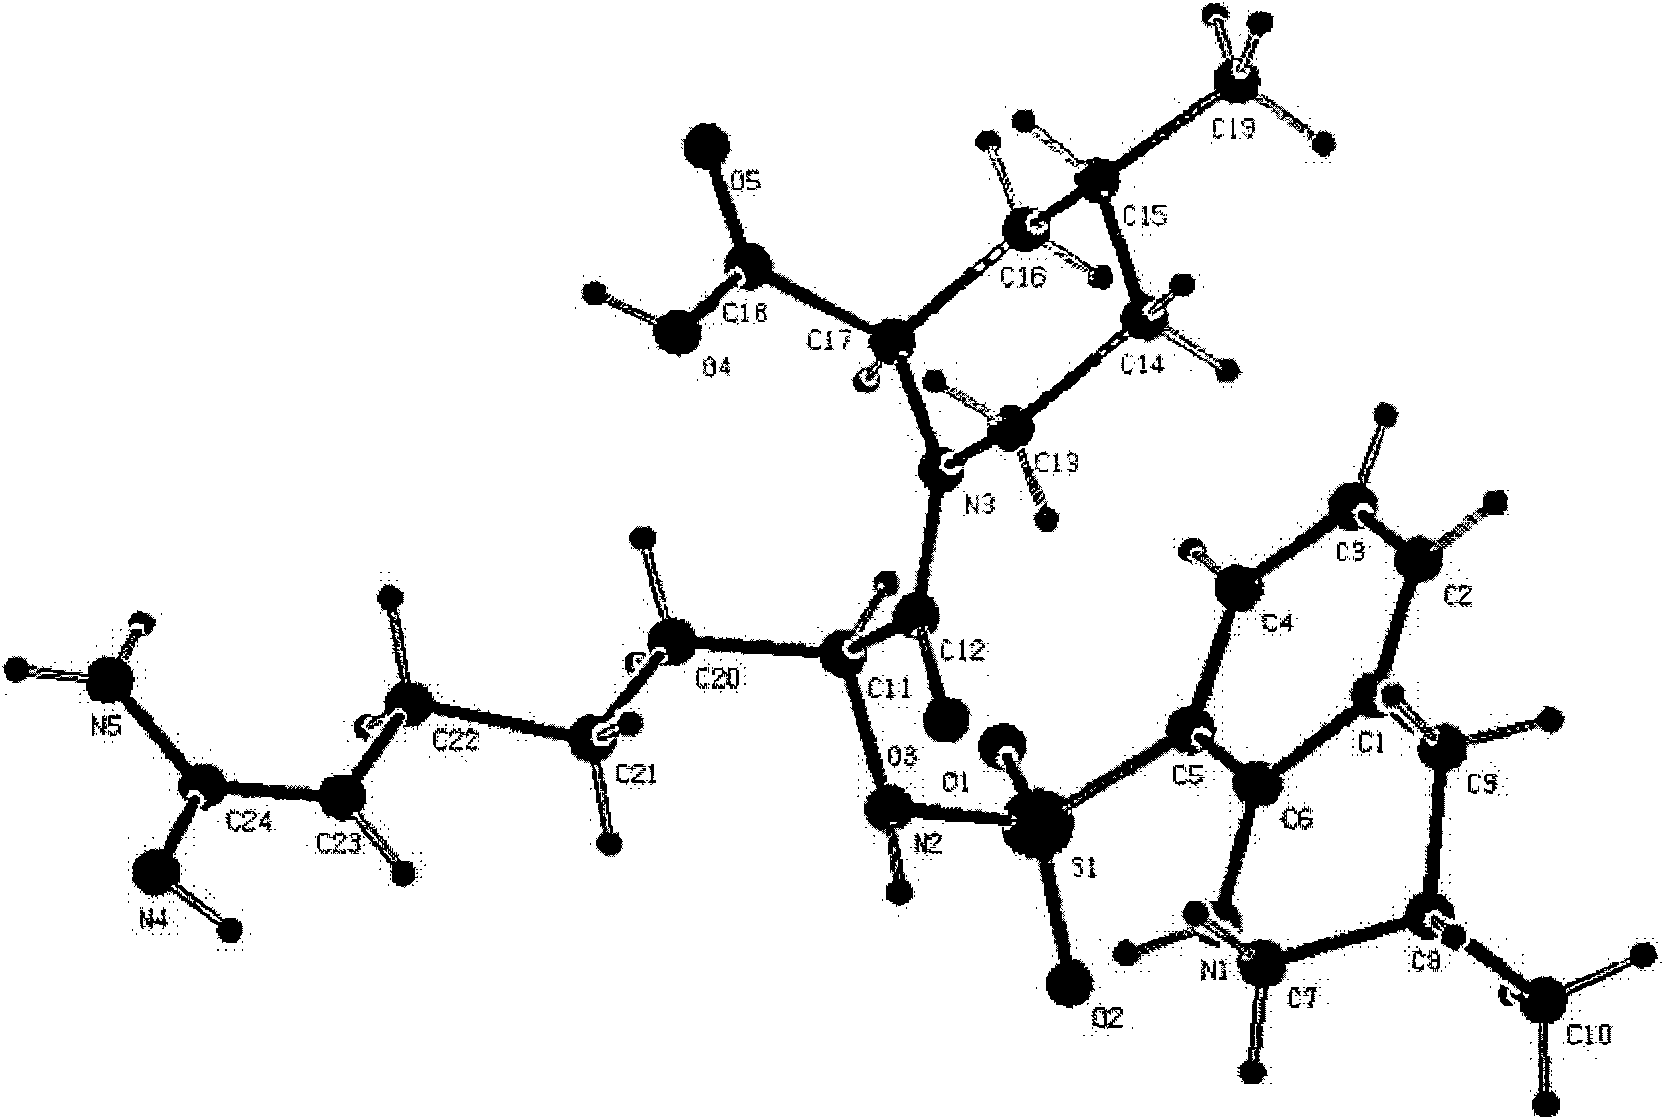 Directional synthesis method for 21(S) argatroban